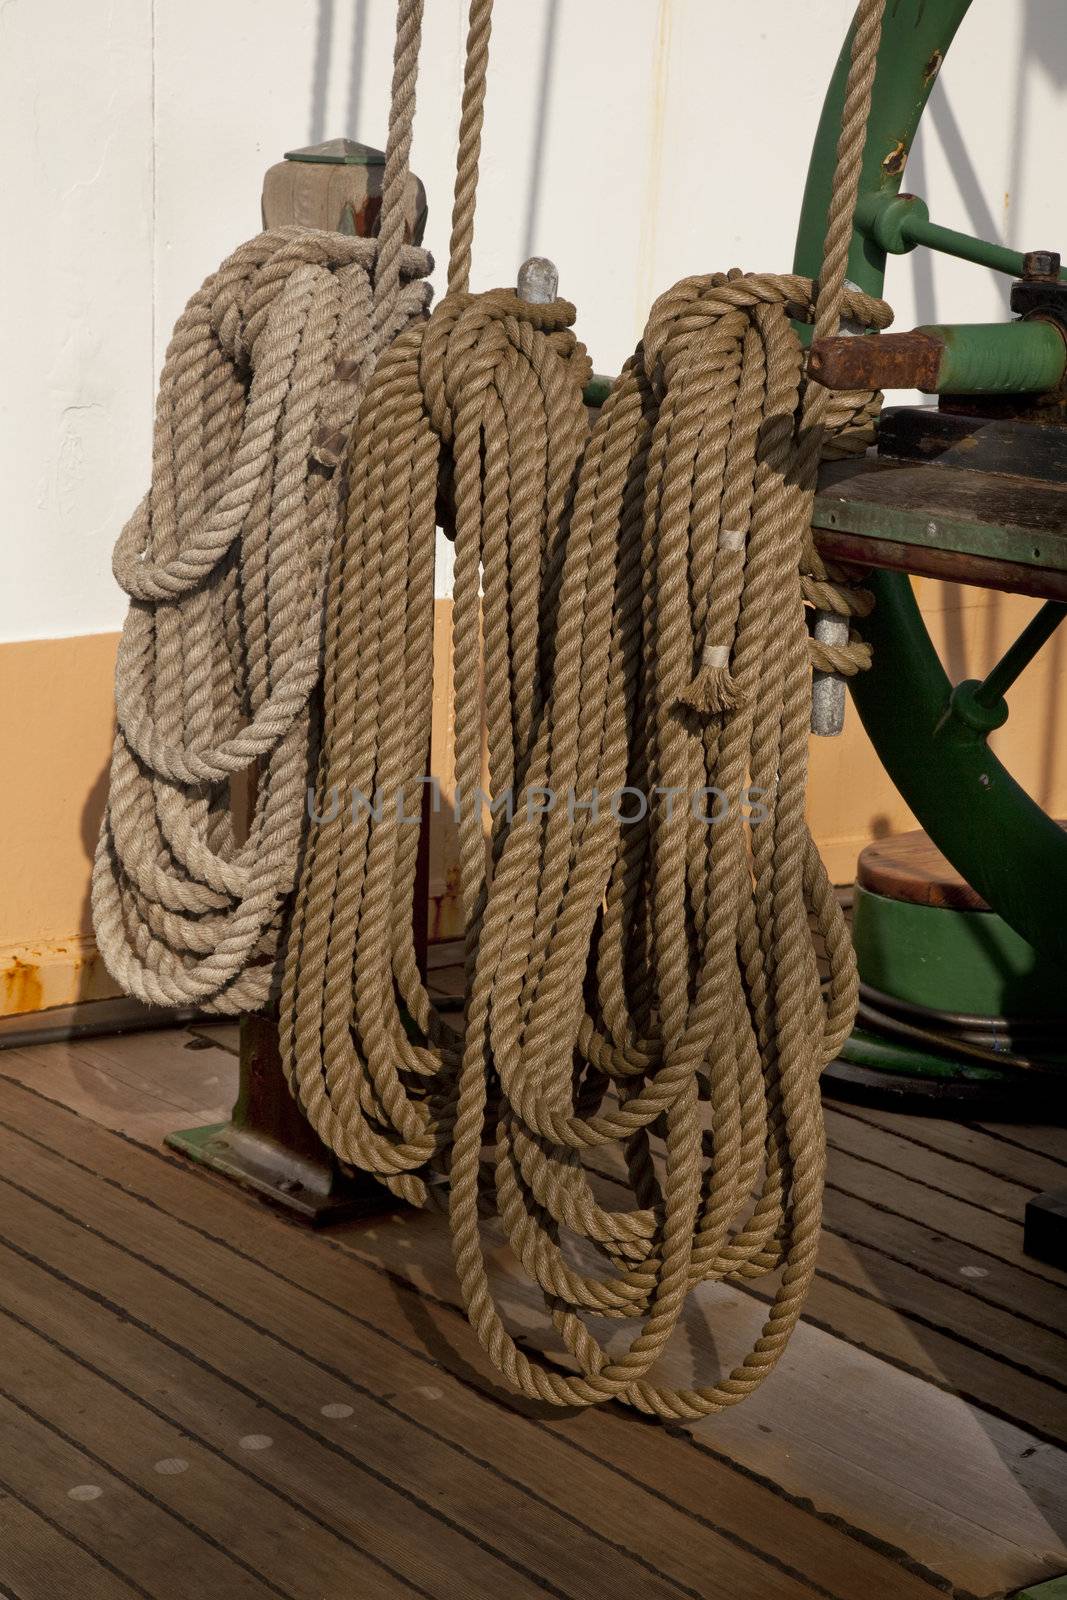 three coils of rope on a deck of sailing ship next to winch used rise sails